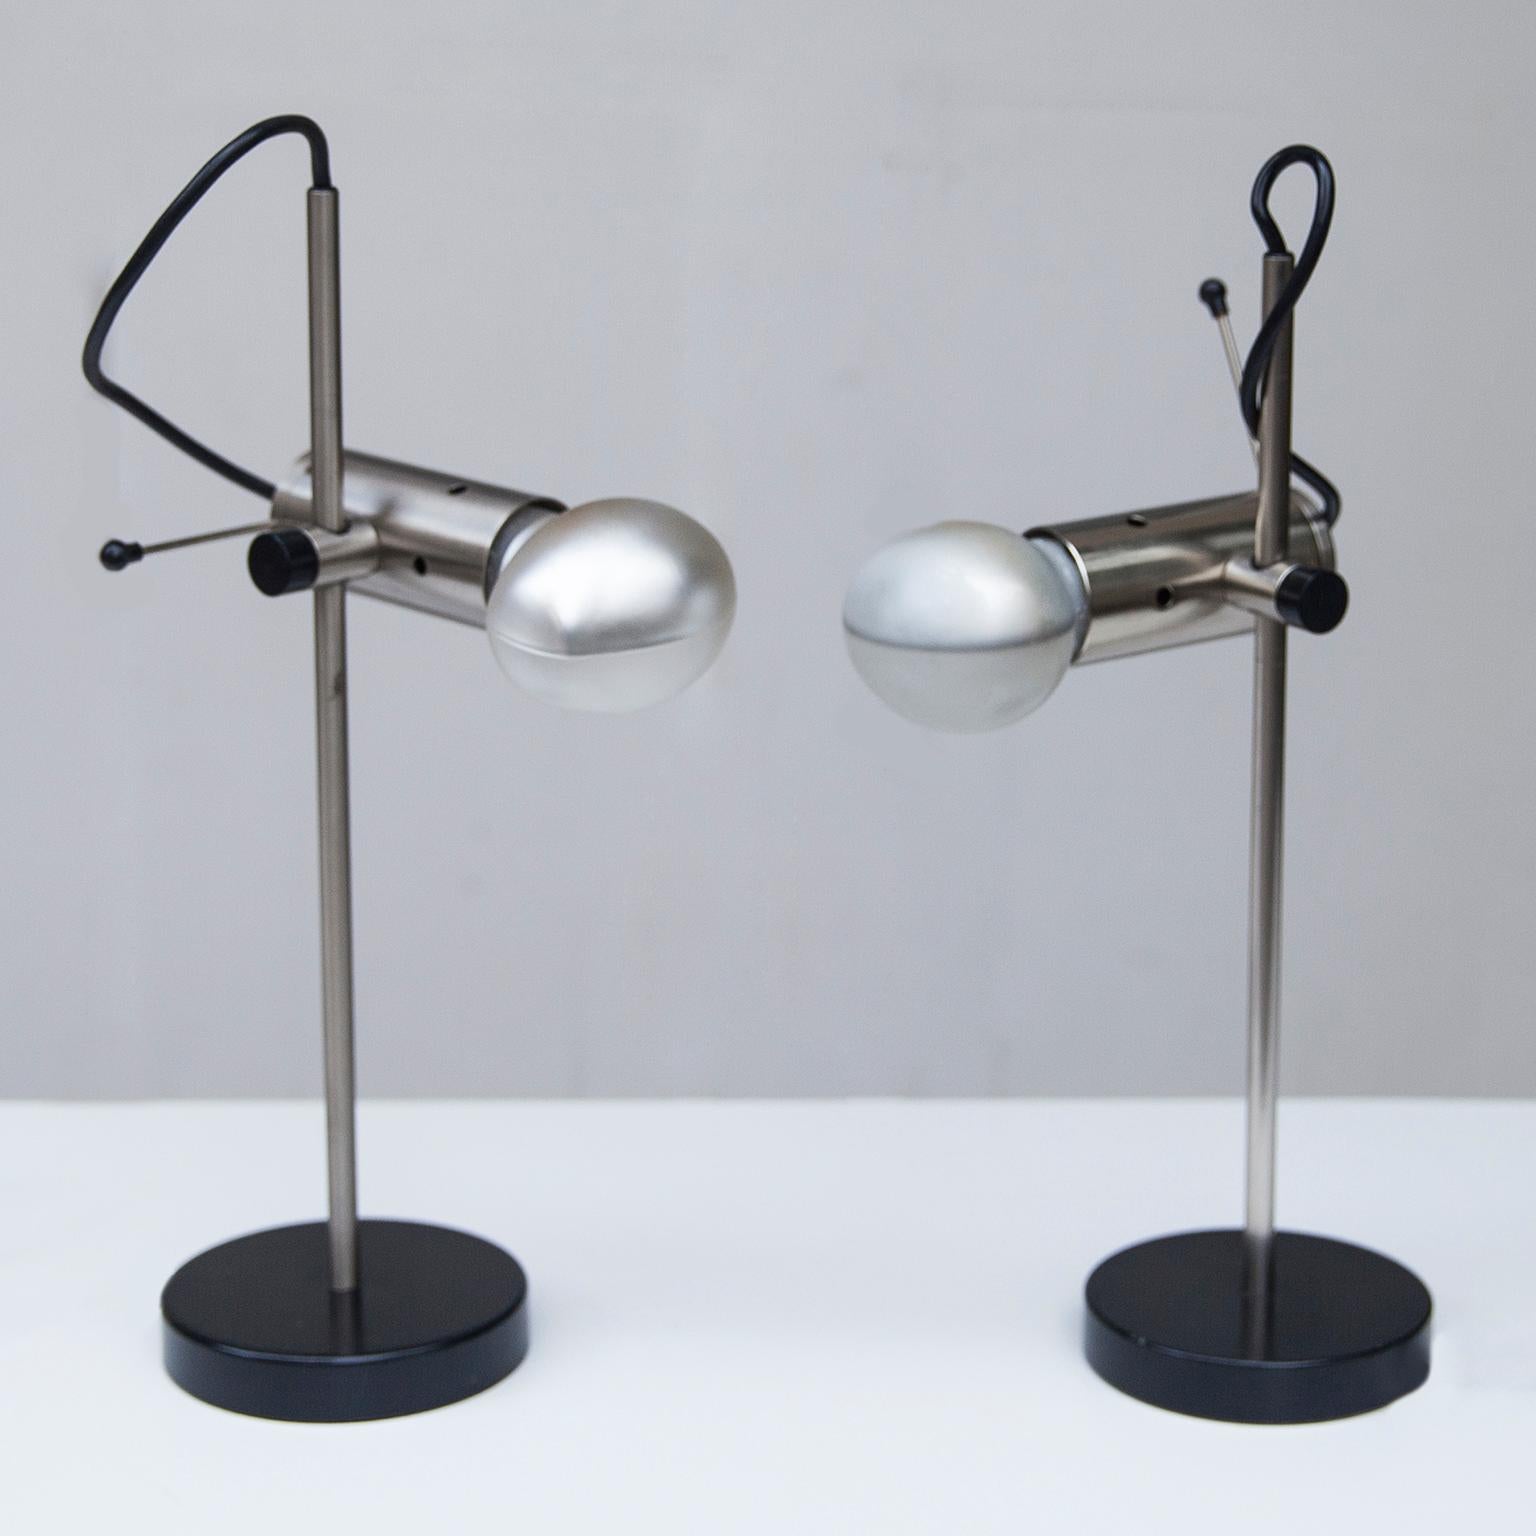 A metal model 251 table lamps by Tito Agnoli for O-Luce. The shade is height-adjustable and it can be turned around. The lamp has the original lightbulb.